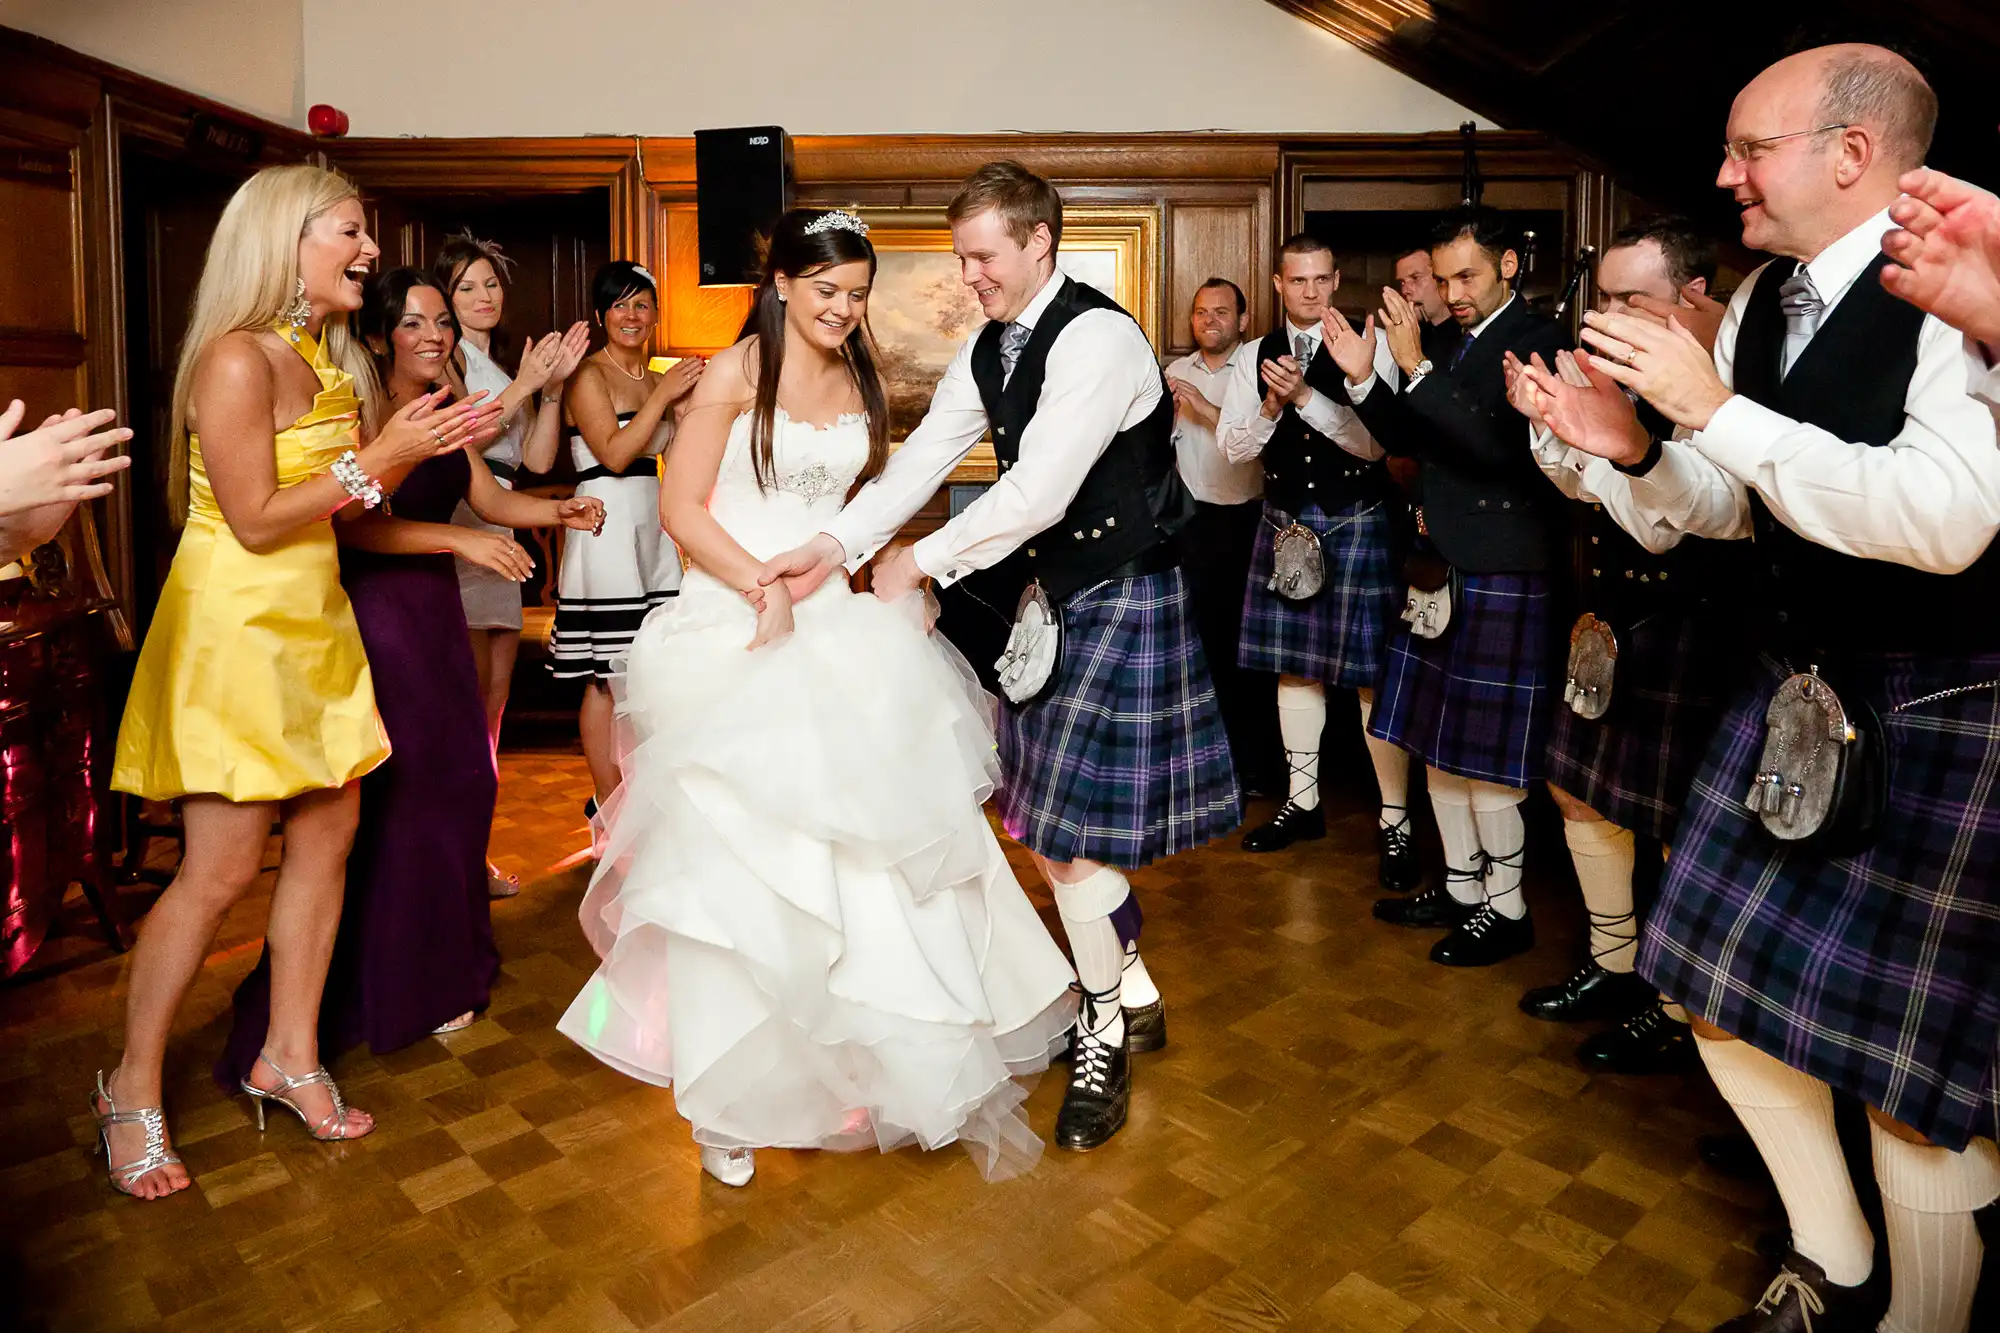 Bride and groom dancing in a hall, surrounded by clapping guests in formal wear and kilts, expressing joy during a wedding reception.